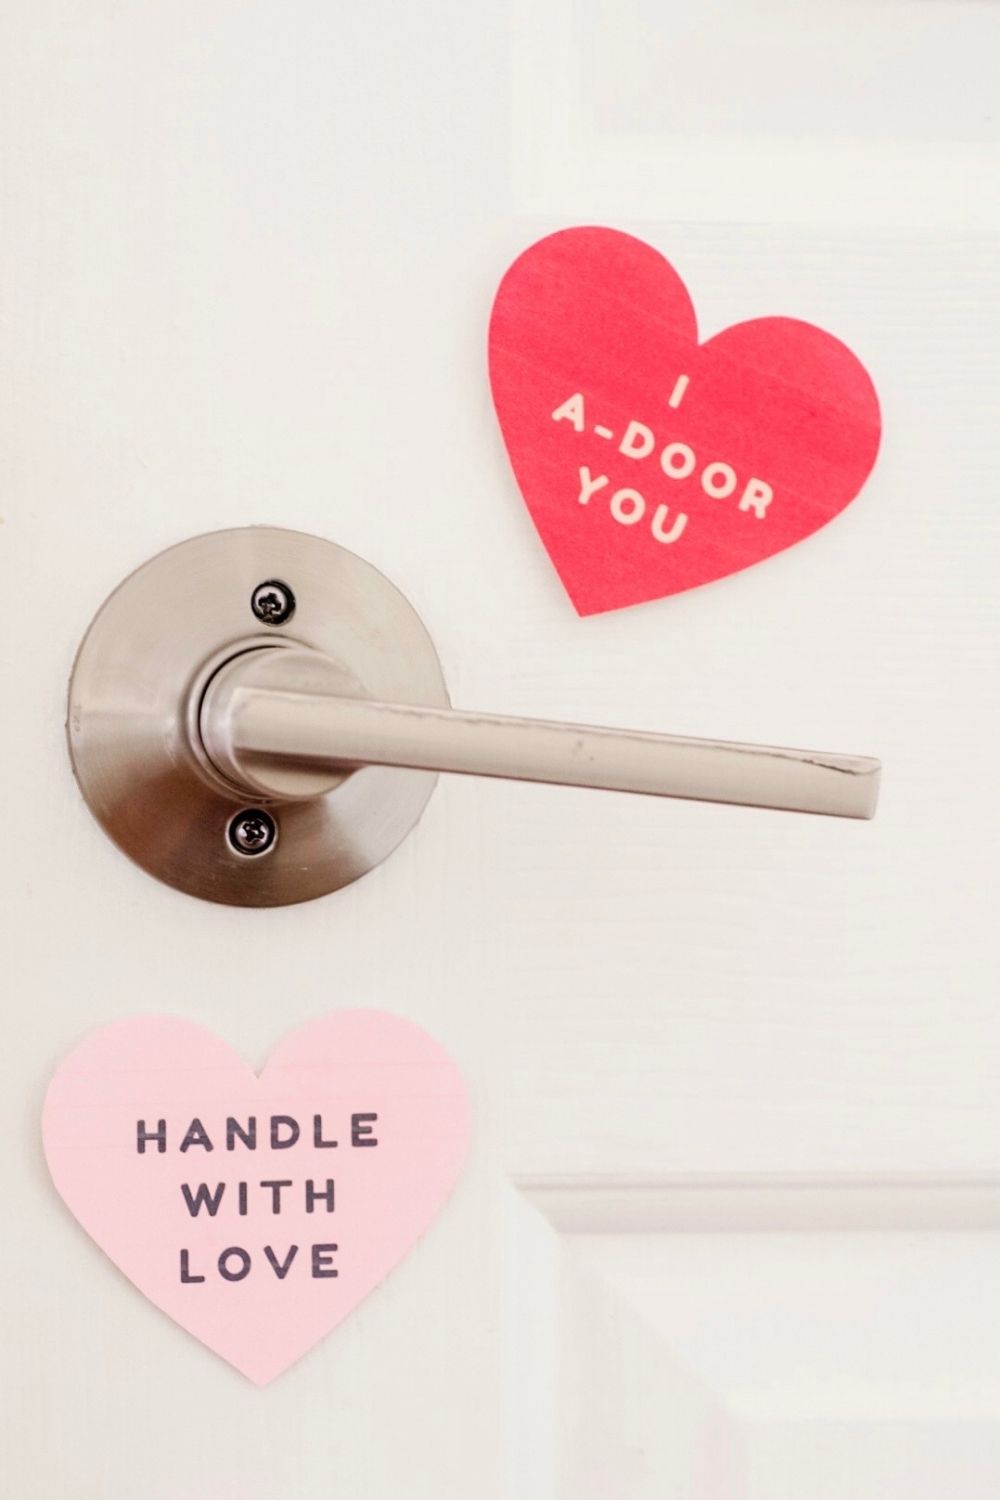 Cute Valentine's Day Pun Cards to Decorate Your Home